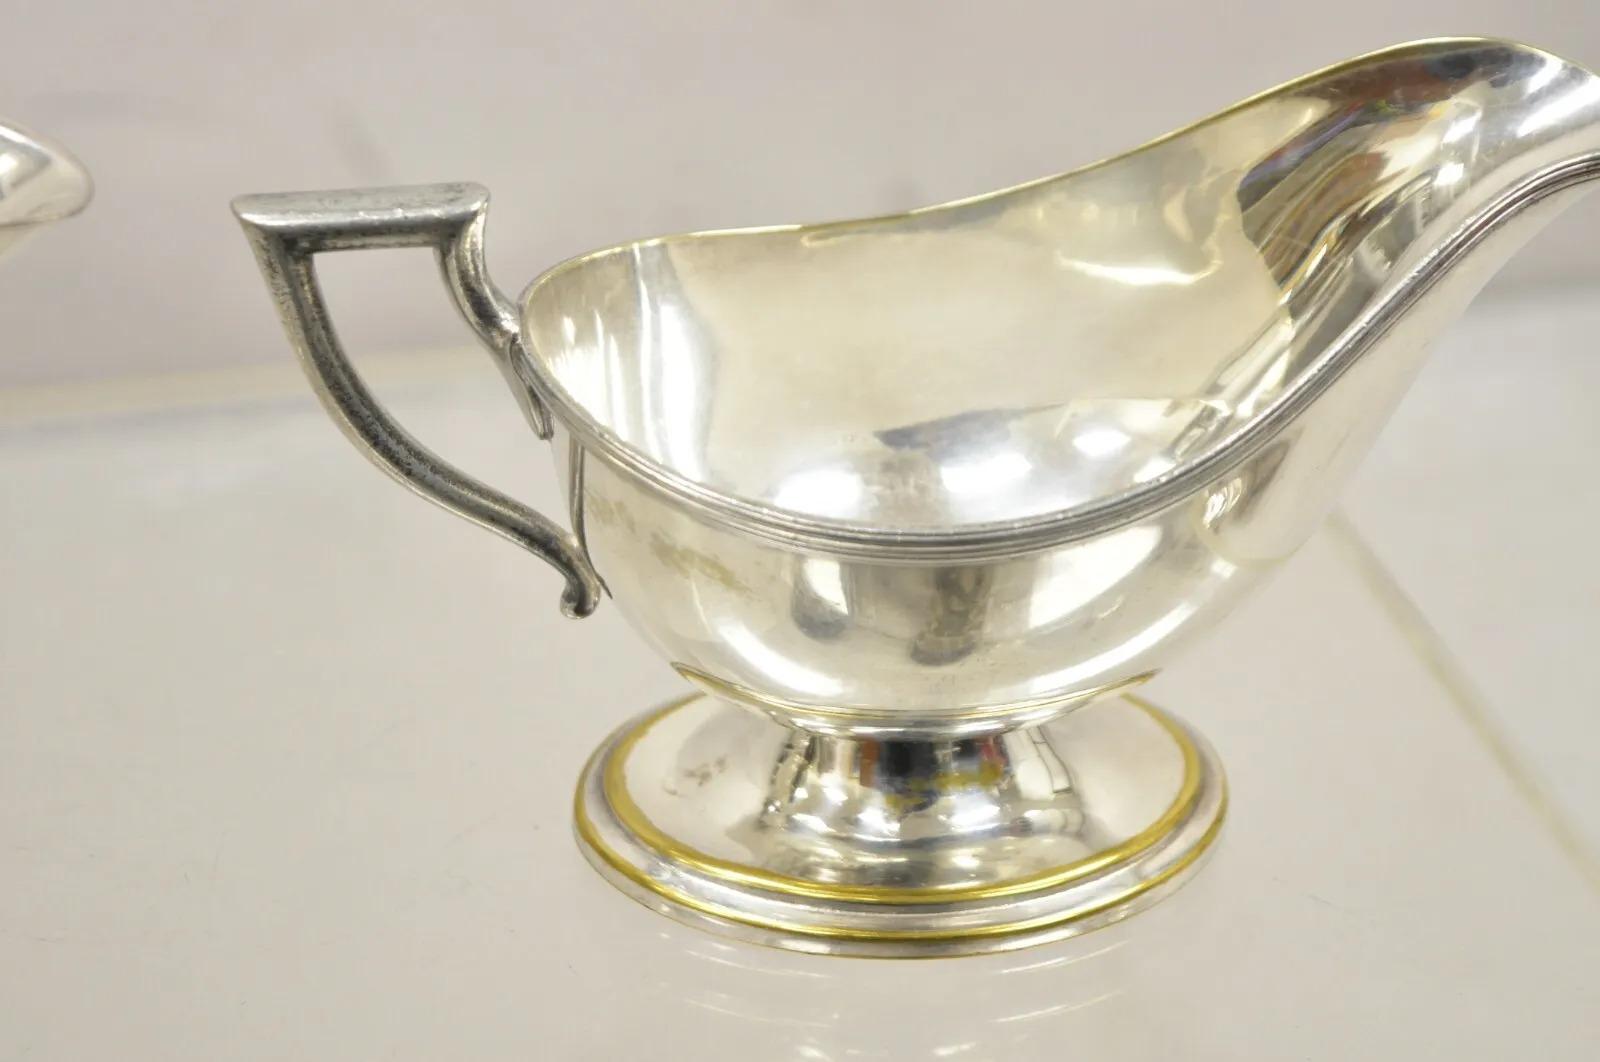 Vintage Silver Plated Victorian Serving Gravy Boat Sauce Boats - Lot of 6 For Sale 5